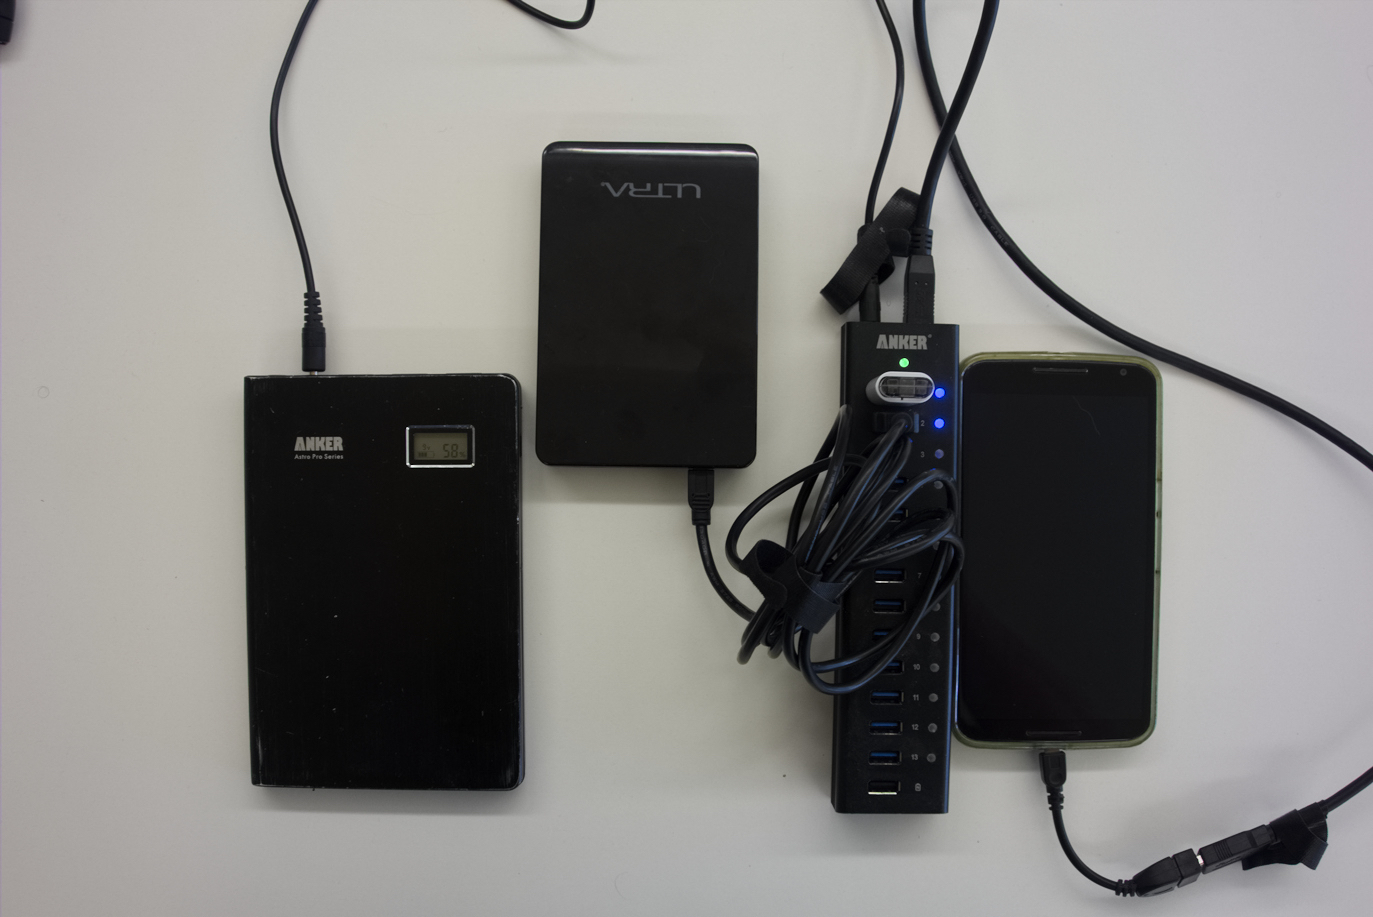 An external battery pack powering a USB hub with a disk drive, a flash drive, and a phone plugged into it.